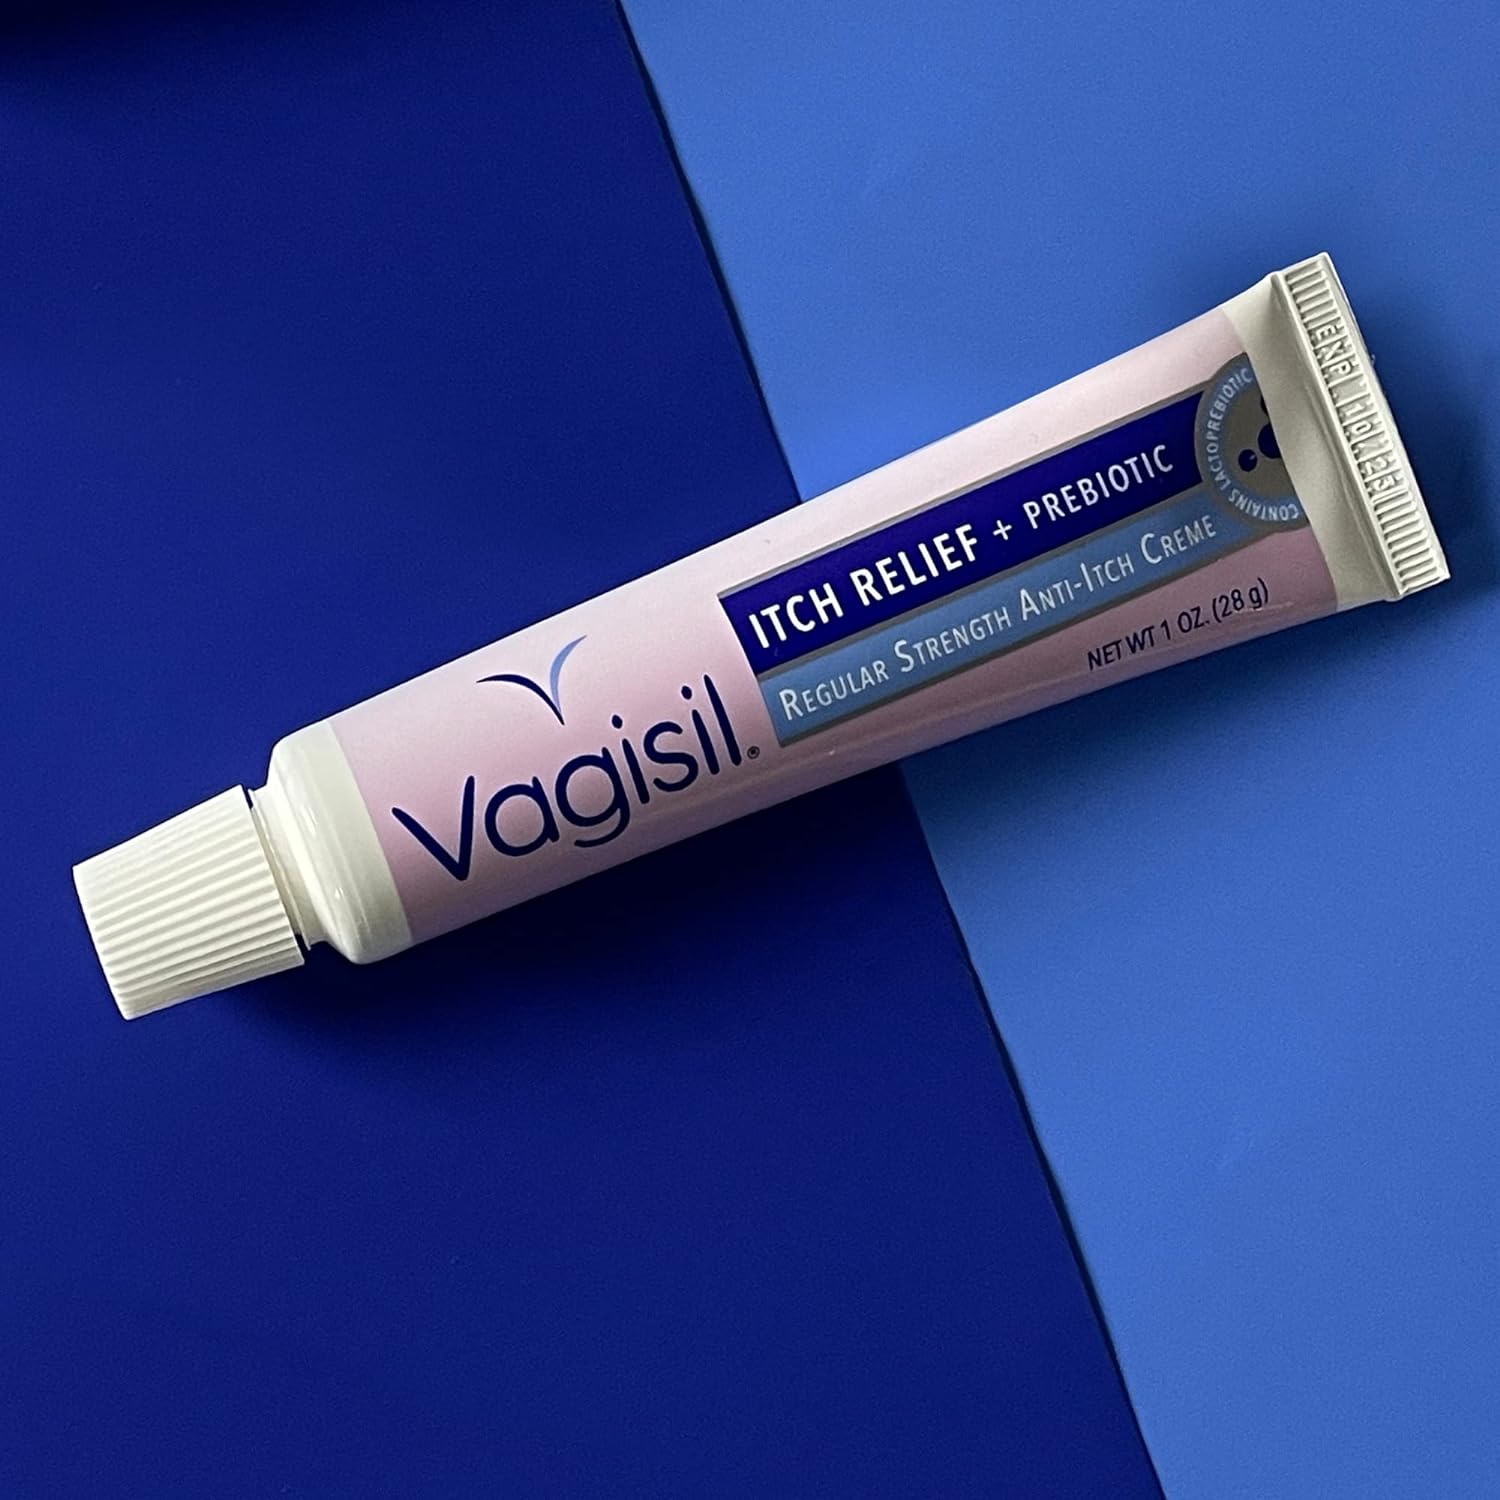 Vagisil Regular Strength Anti-Itch Feminine Cream for Women, Gynecologist Tested, Hypoallergenic, Fast-acting and Long-lasting Itch Relief, Vaginal Moisturizer Soothes and Cools, 1 oz (Pack of 1) : Everything Else